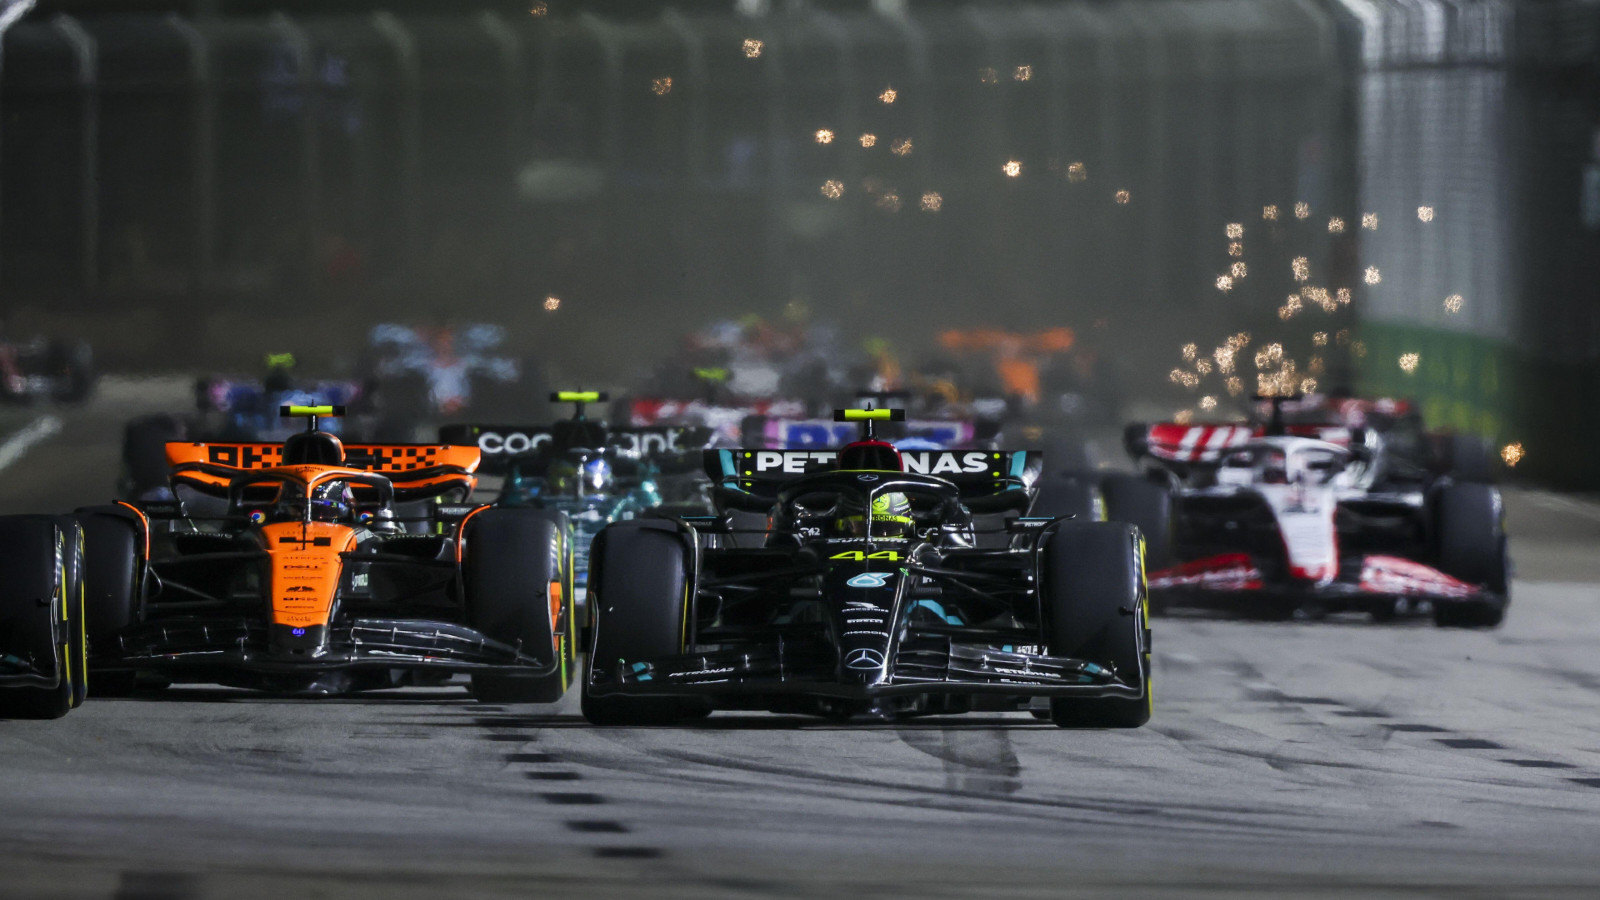 The start of the race at the 2023 Singapore Grand Prix.